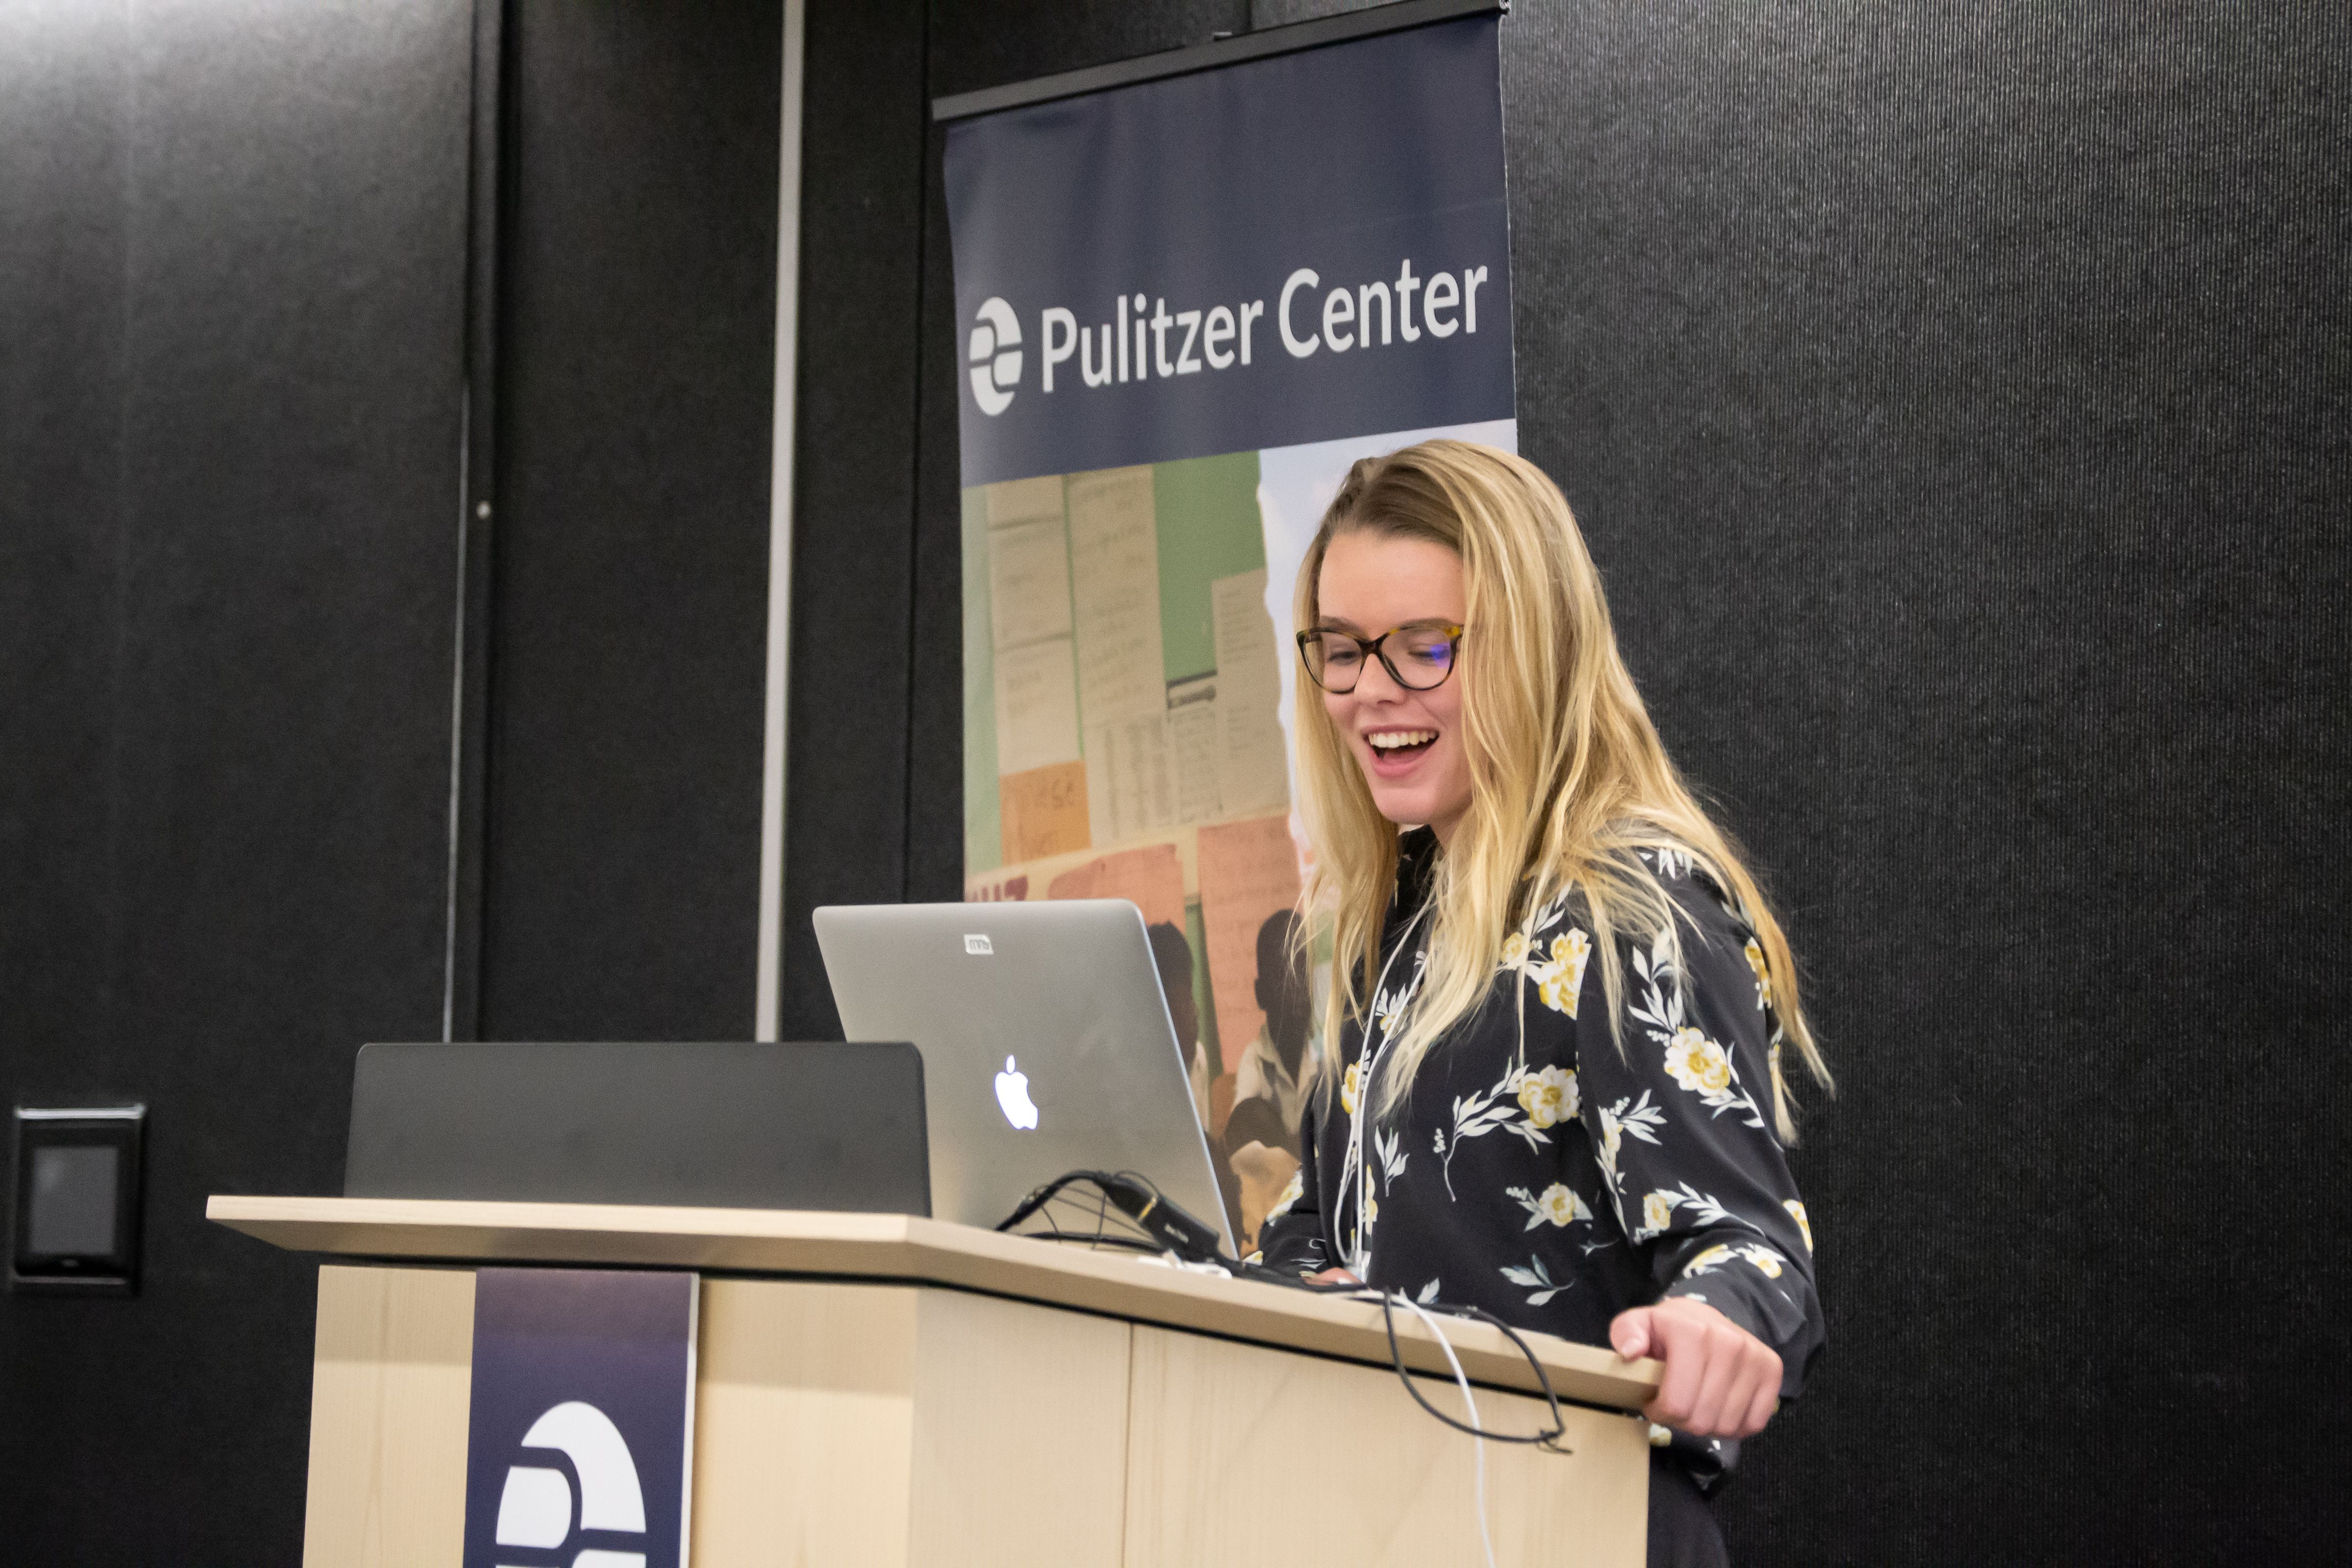 Katelyn Weisbrod from the University of Iowa School of Journalism and Mass Communication presents her reporting on waste management in Kerala. Image by Nora Moraga-Lewy. United States, 2019.